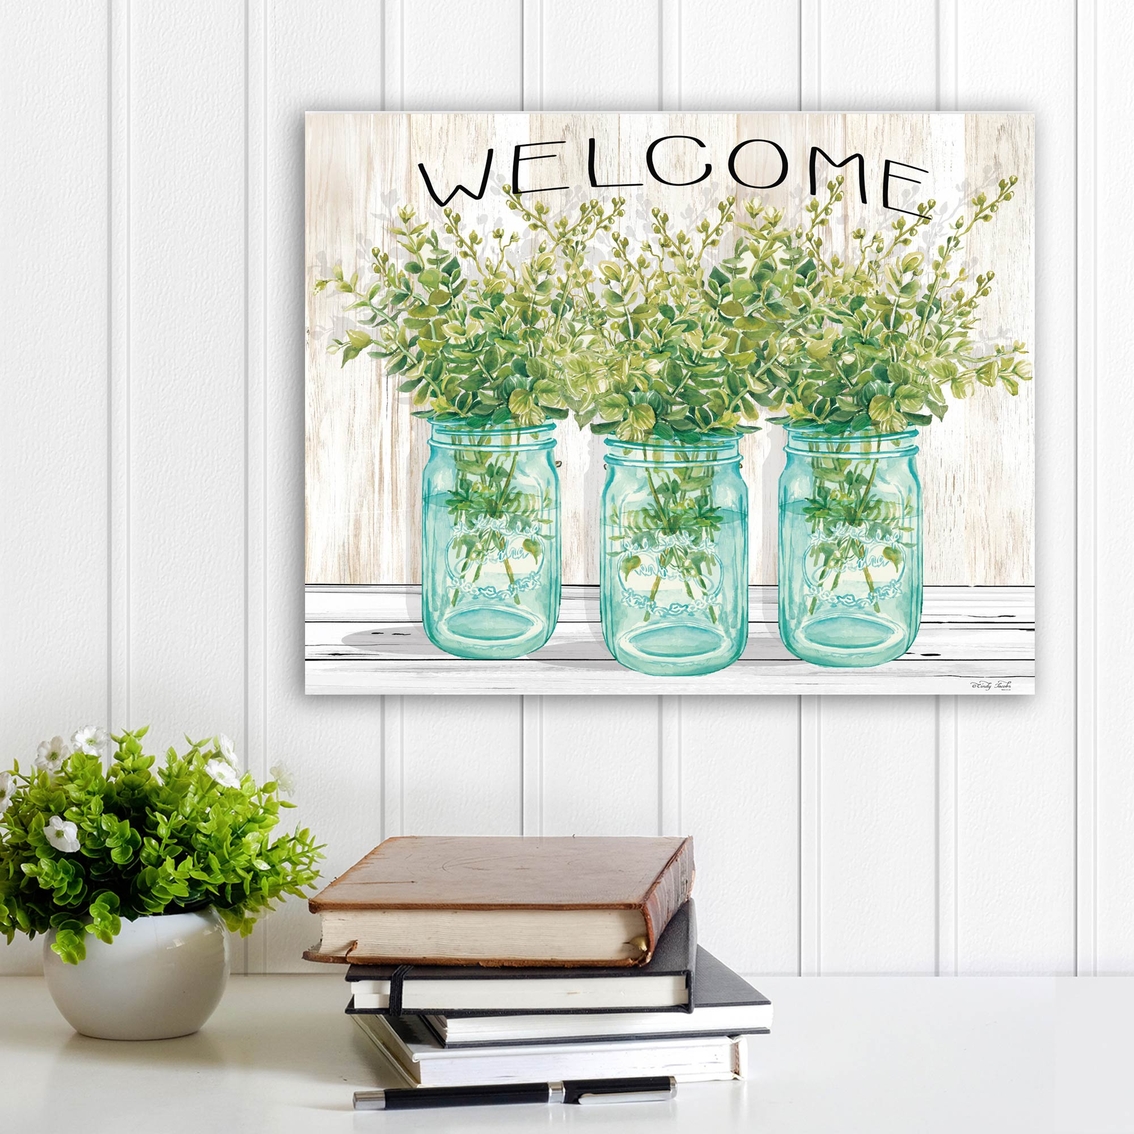 Courtside Market Welcome Canvas Wall Art - Image 2 of 2